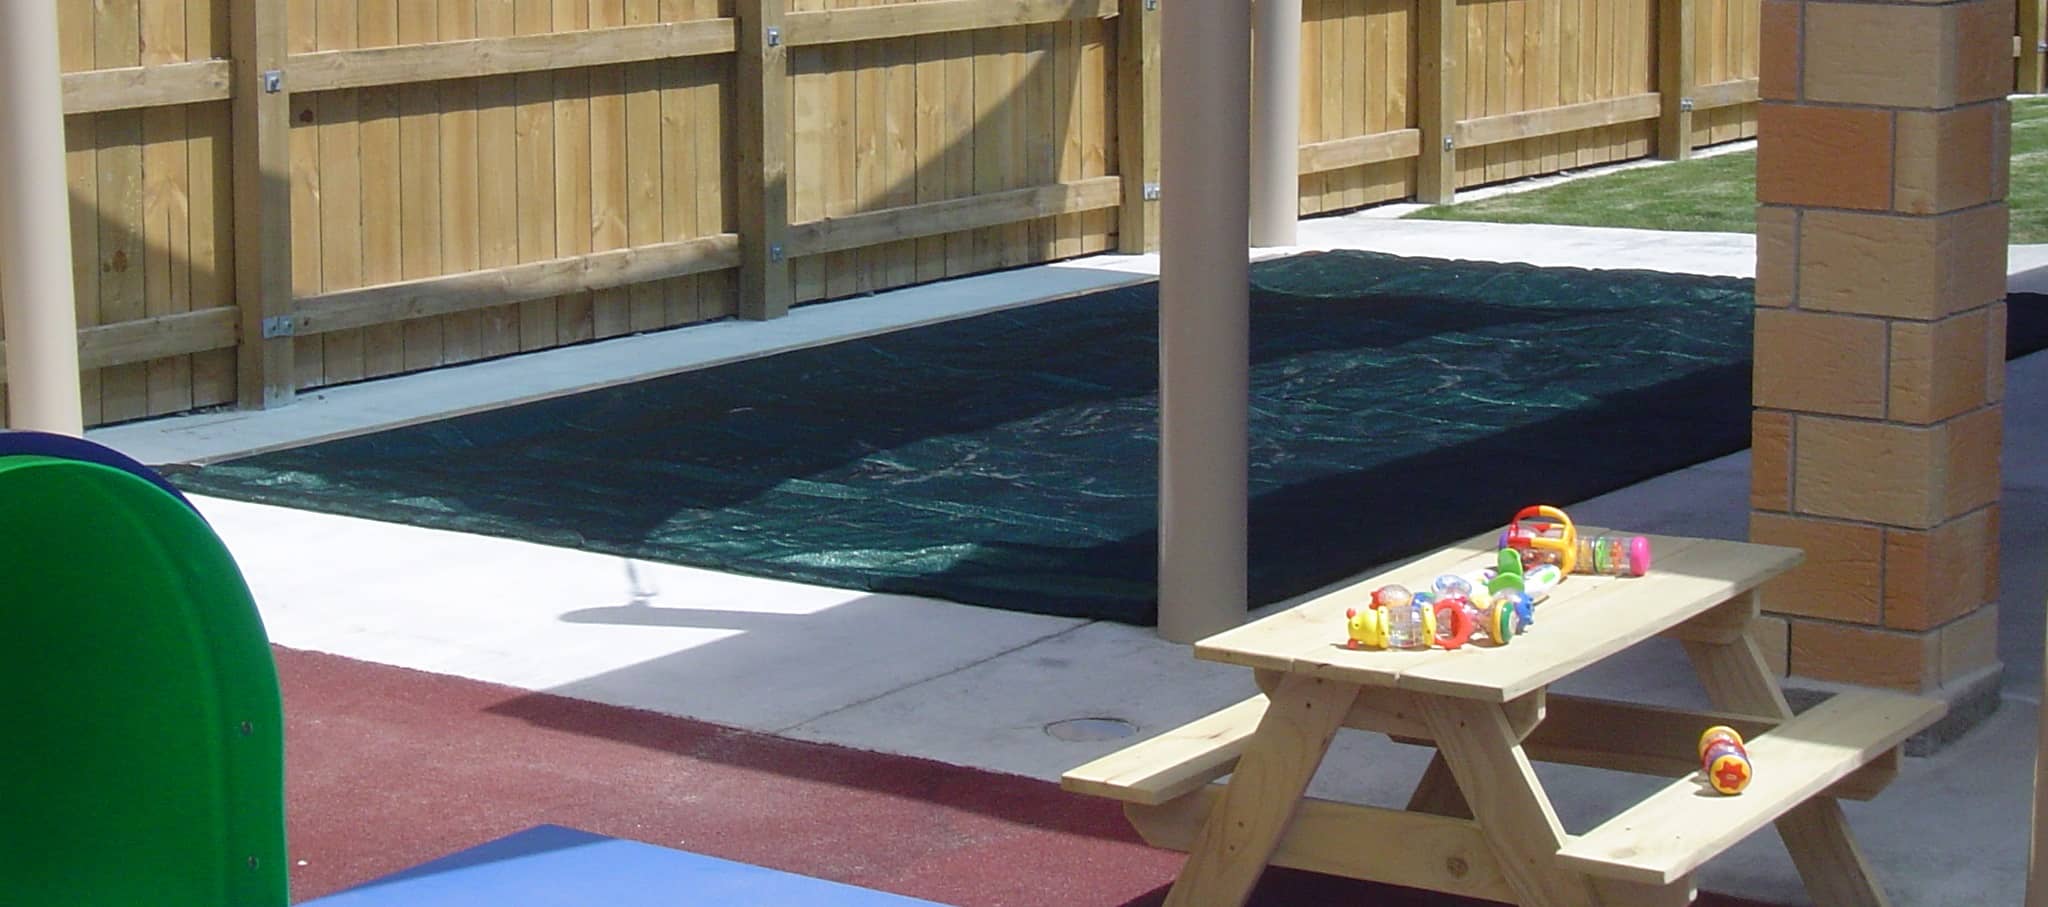 Header image of a Sandpit cover at a Playcentre by Sunshade NZ